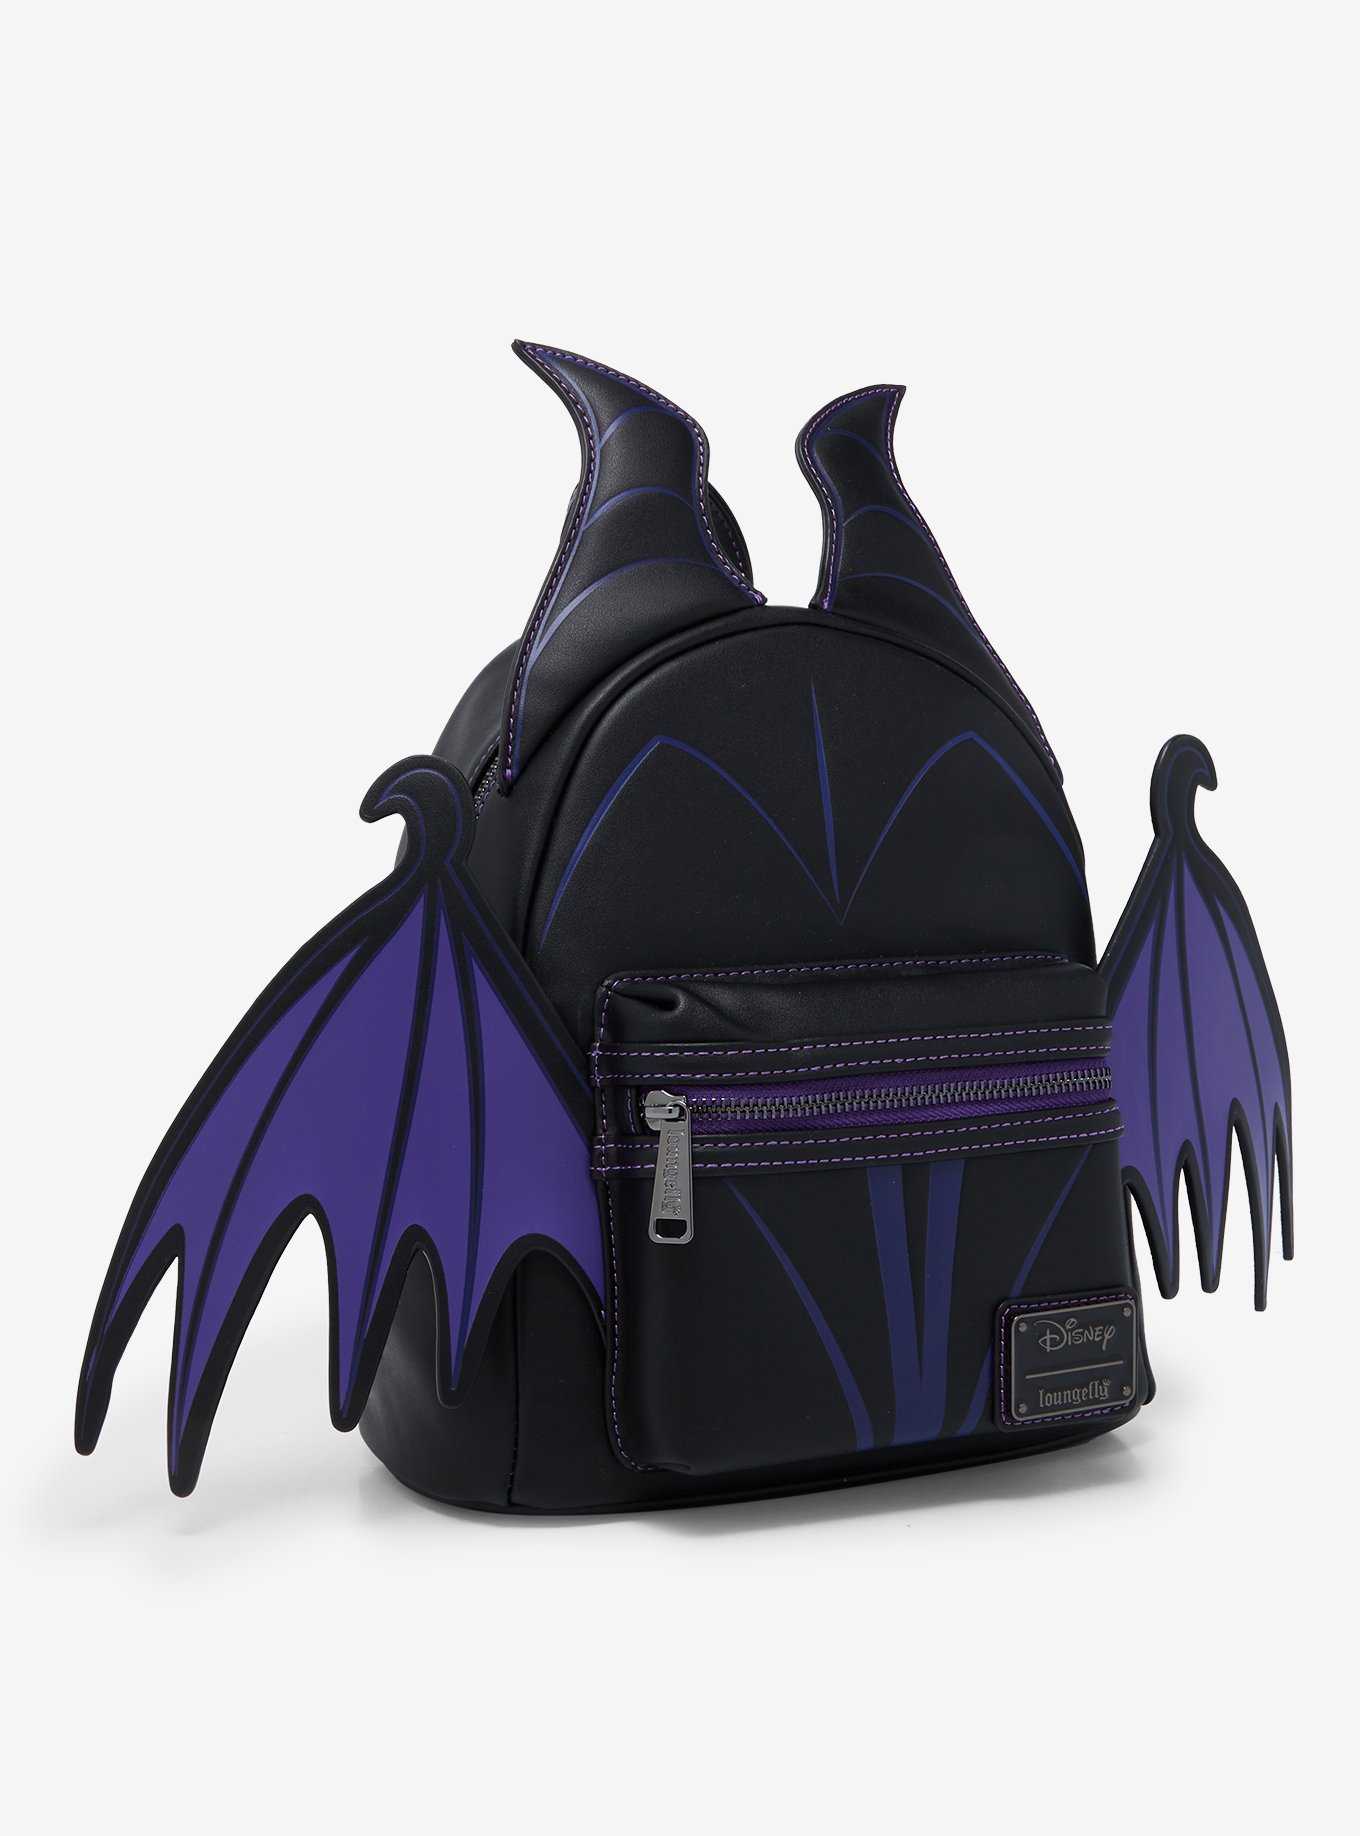 Loungefly Disney Sleeping Beauty Maleficent Figural Mini Backpack - BoxLunch Exclusive, , hi-res